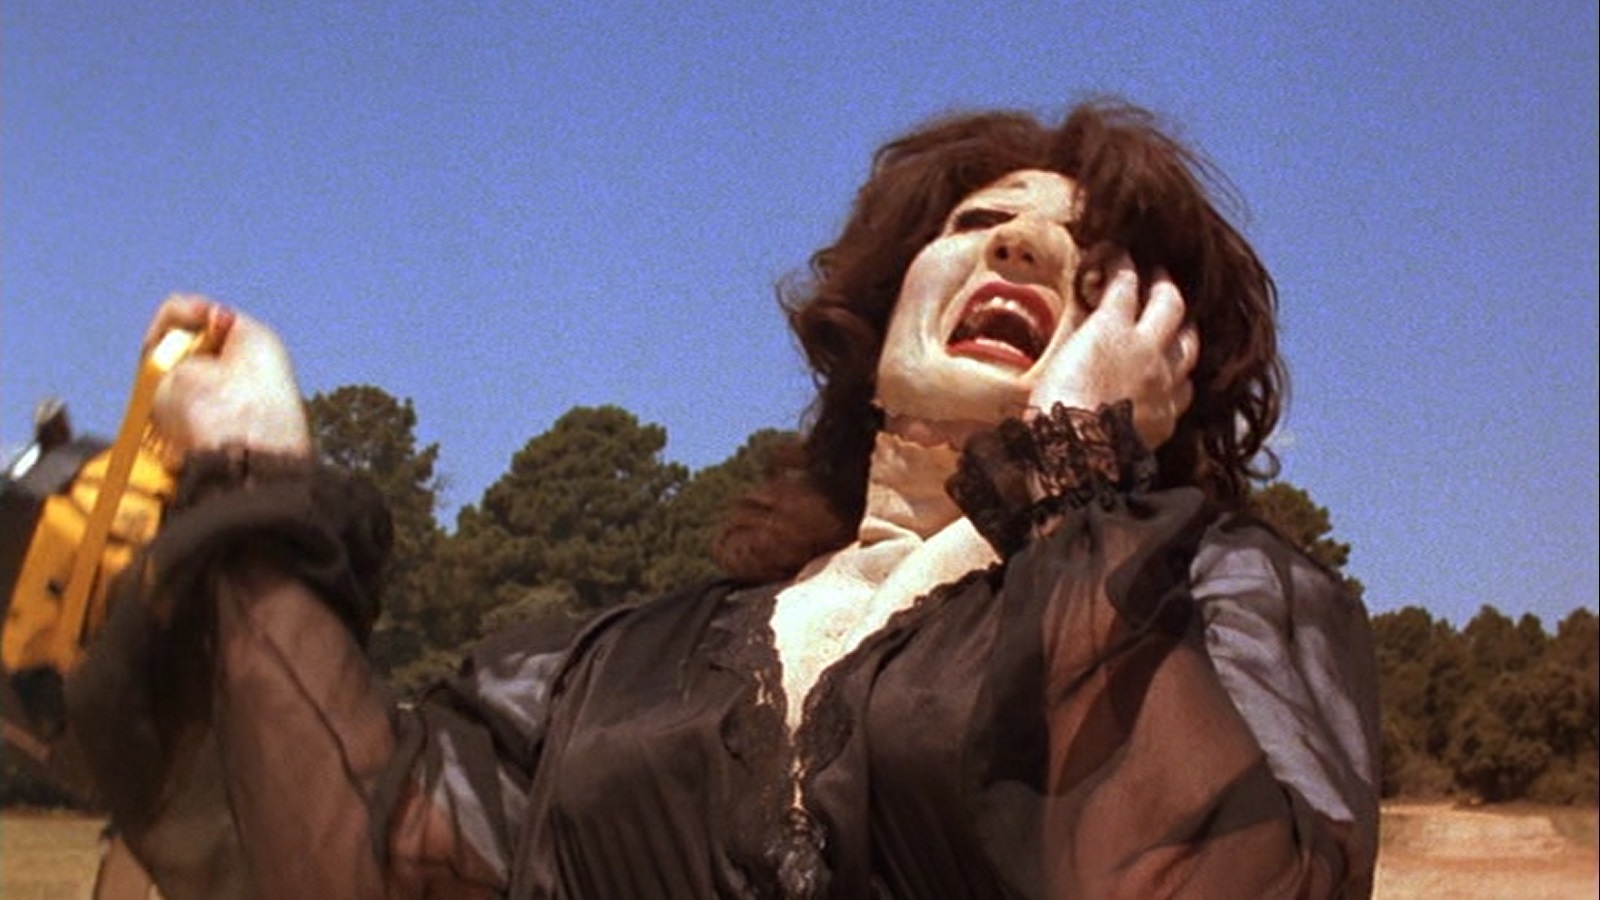 Robert Jacks as a cross-dressing Leatherface in The Return of the Texas Chainsaw Massacre (1994)